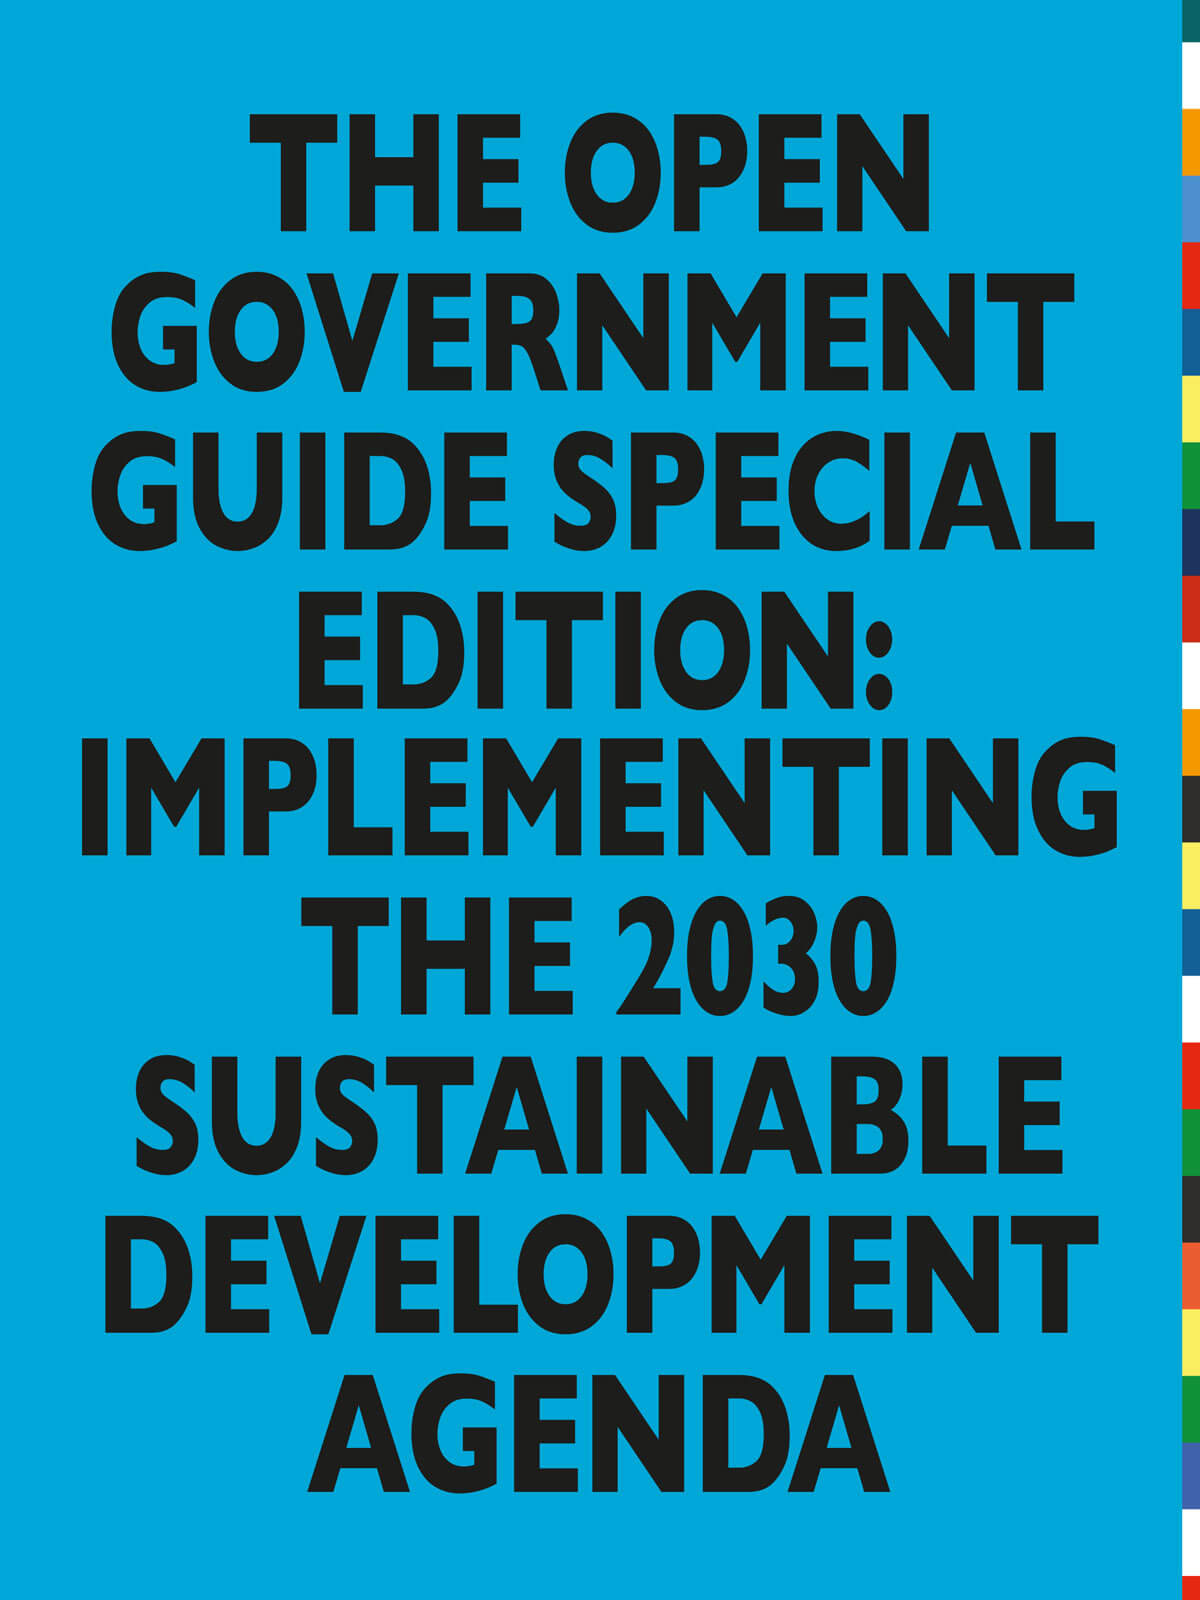 Implementing the 2030 Sustainable Development Agenda